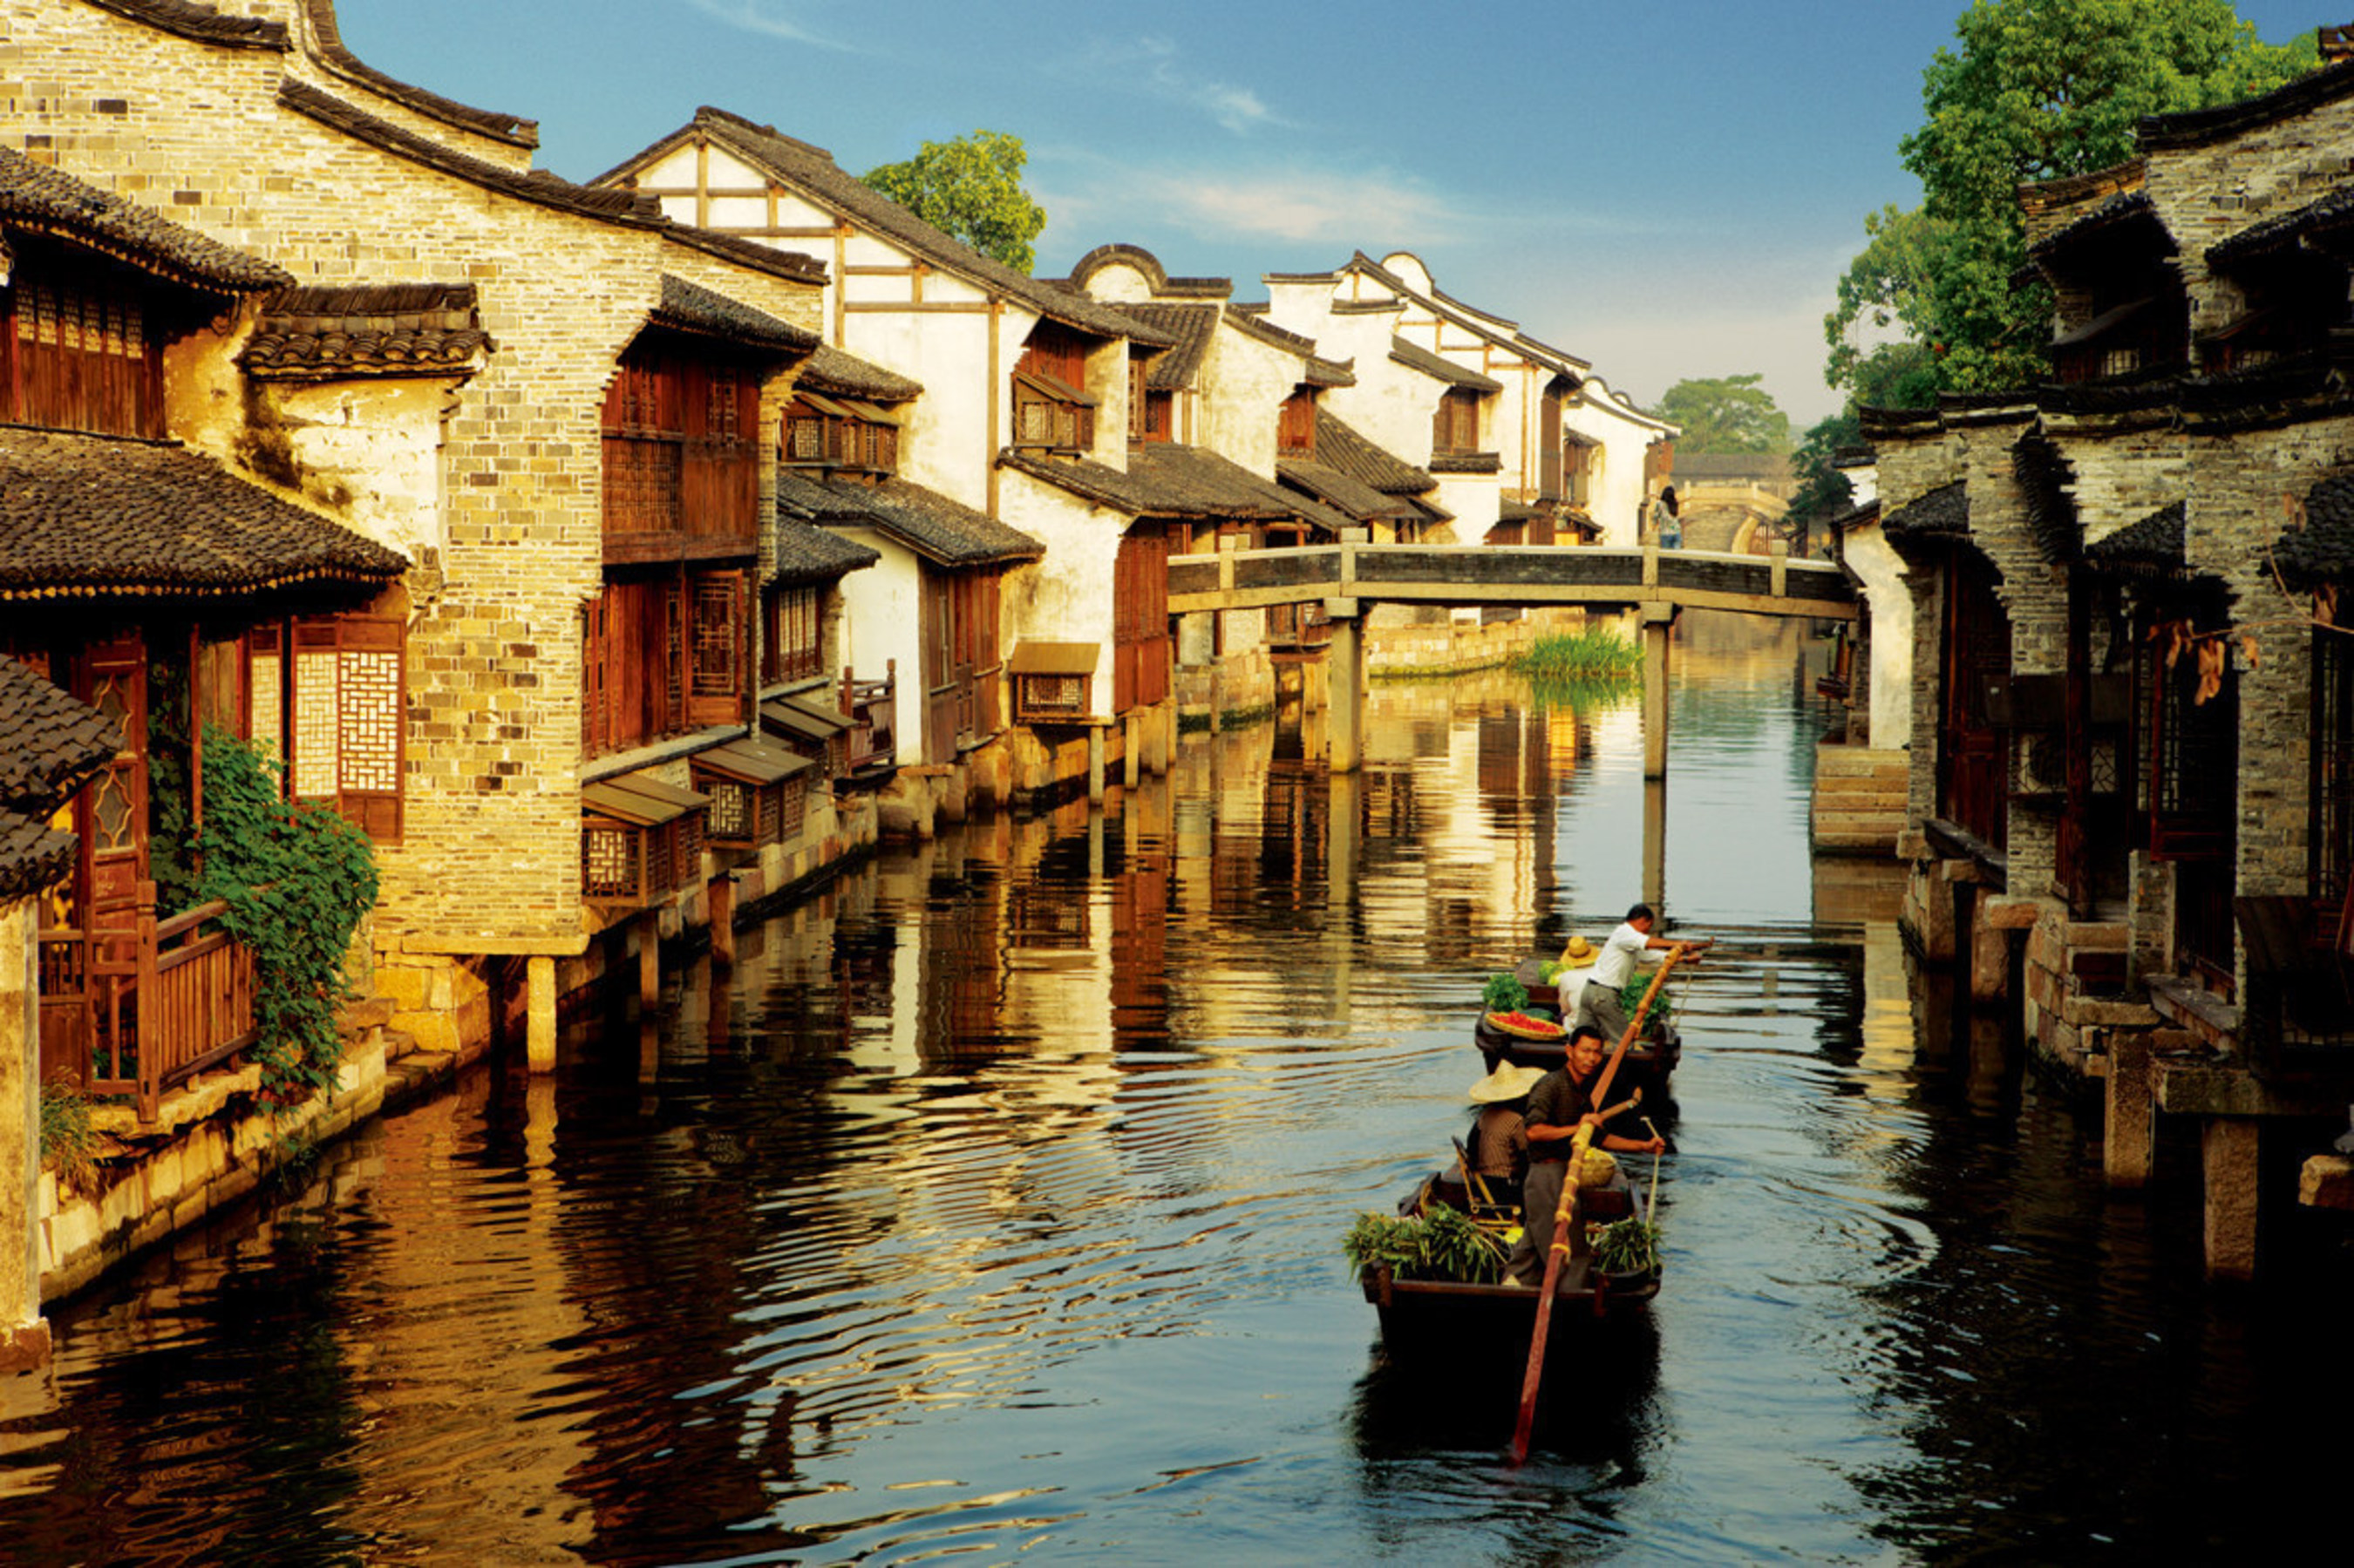 Wake up naturally on Wuzhen’s water pillow, listen to the gentle sway of the sculling boat outside the window, and experience the carefree and leisurely life in this small Yangtze River Delta town. (PRNewsFoto/Wuzhen Tourism Co., Ltd.)